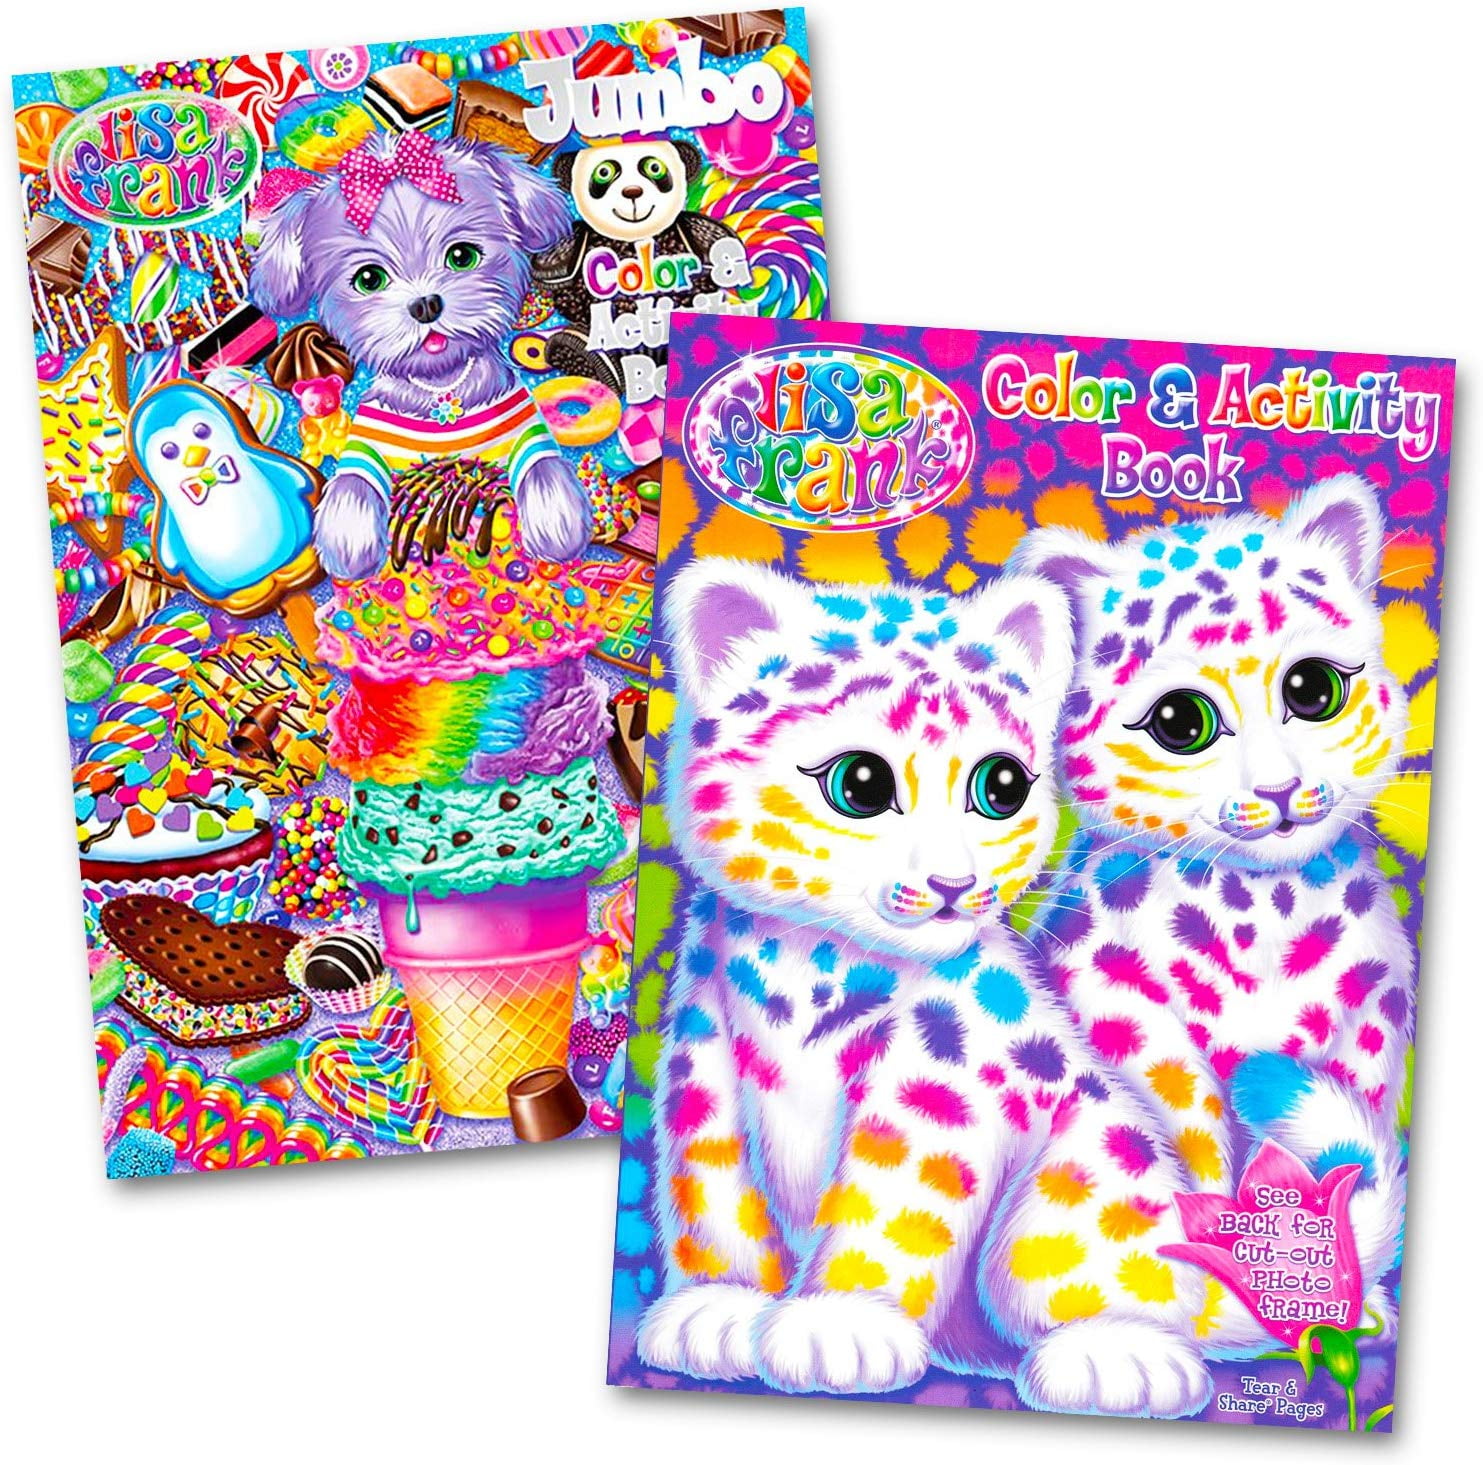 Coloring and Activity Book Set (2 Books), Delight your Lisa Frank fan